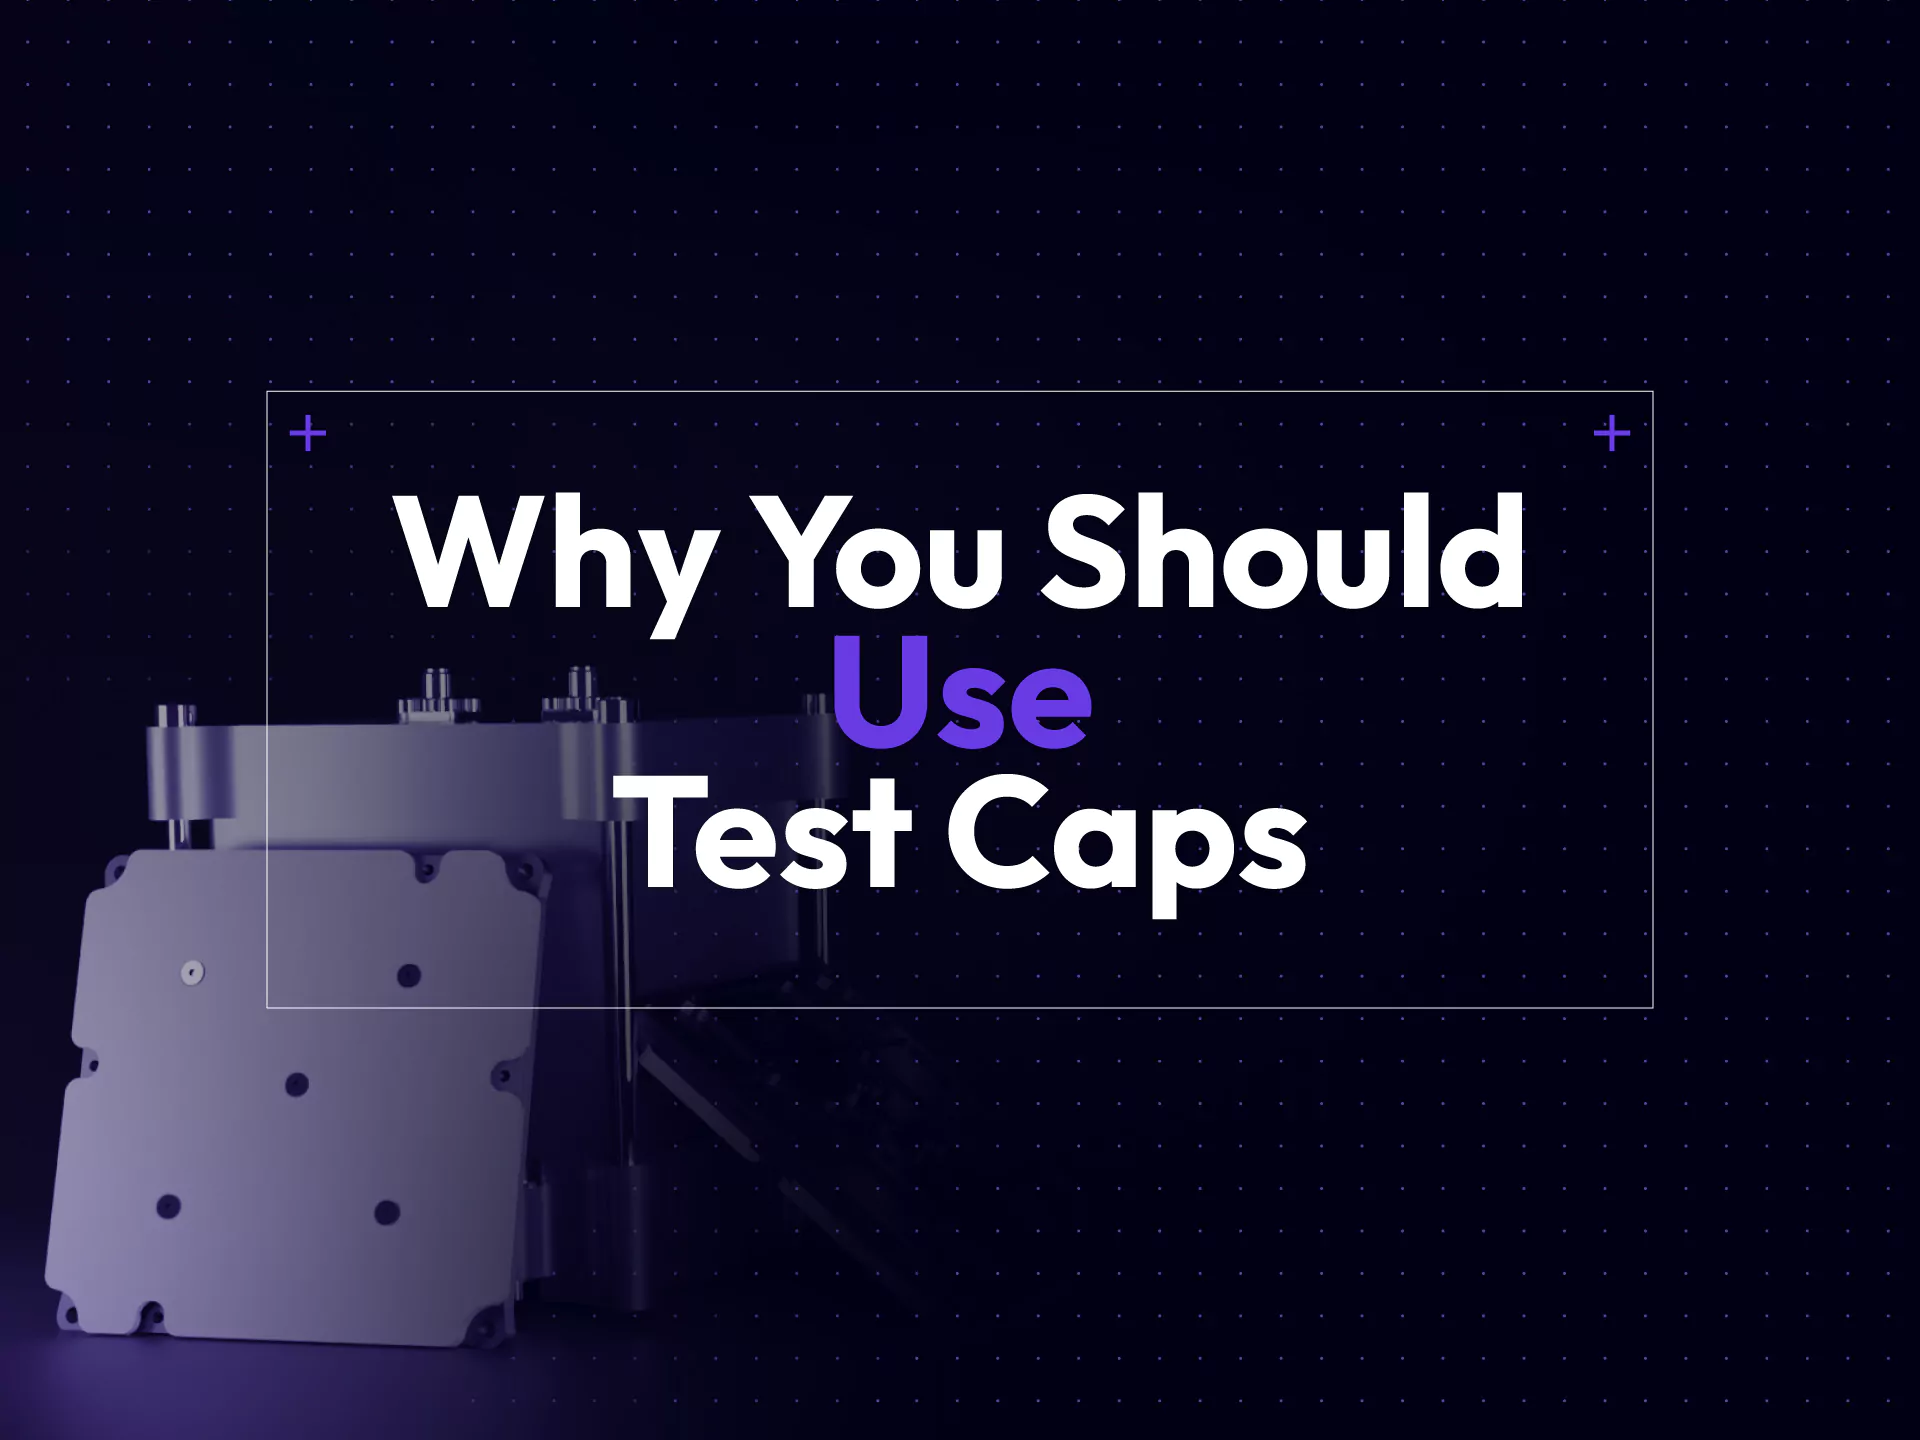 Why You Should Use Test Caps